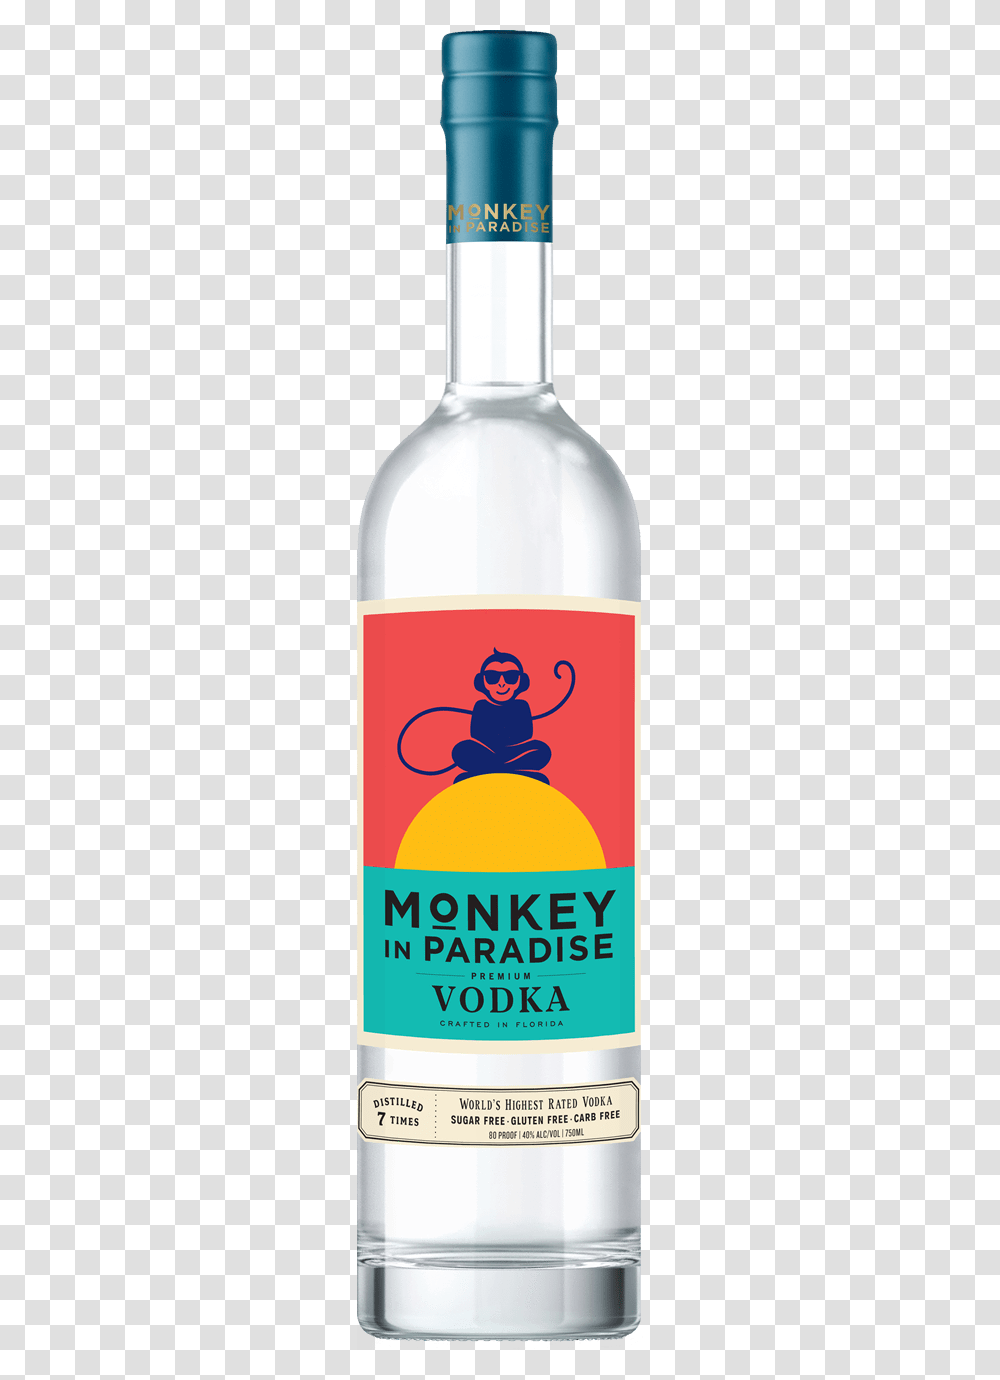 Monkey In Paradise Vodka Price, Bottle, Angry Birds Transparent Png